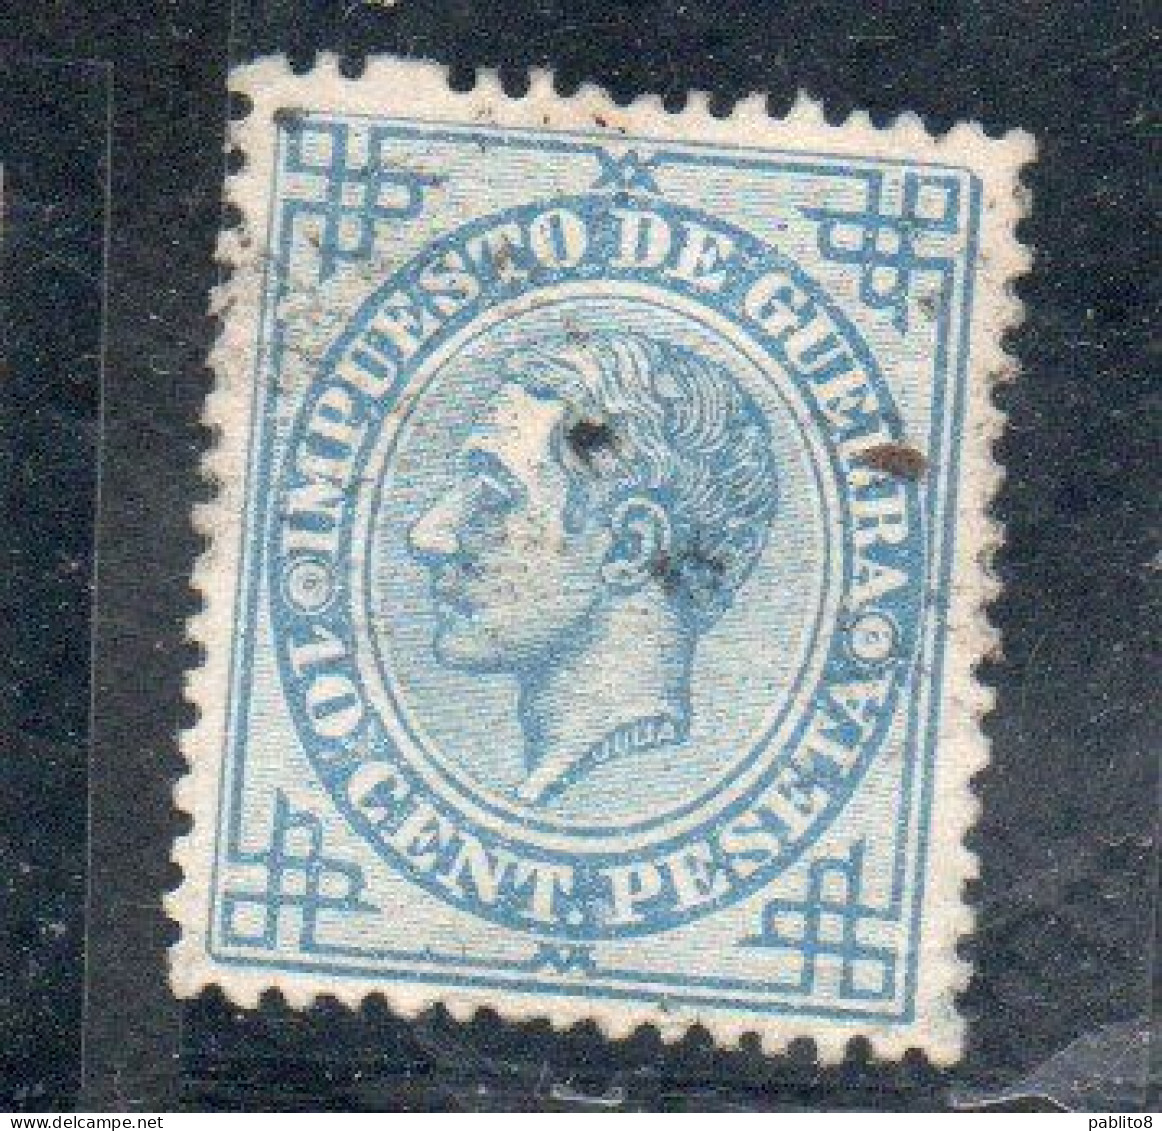 SPAIN ESPAÑA SPAGNA 1875 1876 WAR TAX STAMPS KING RE ROI ALFONSO XII 10c MH - Impots De Guerre